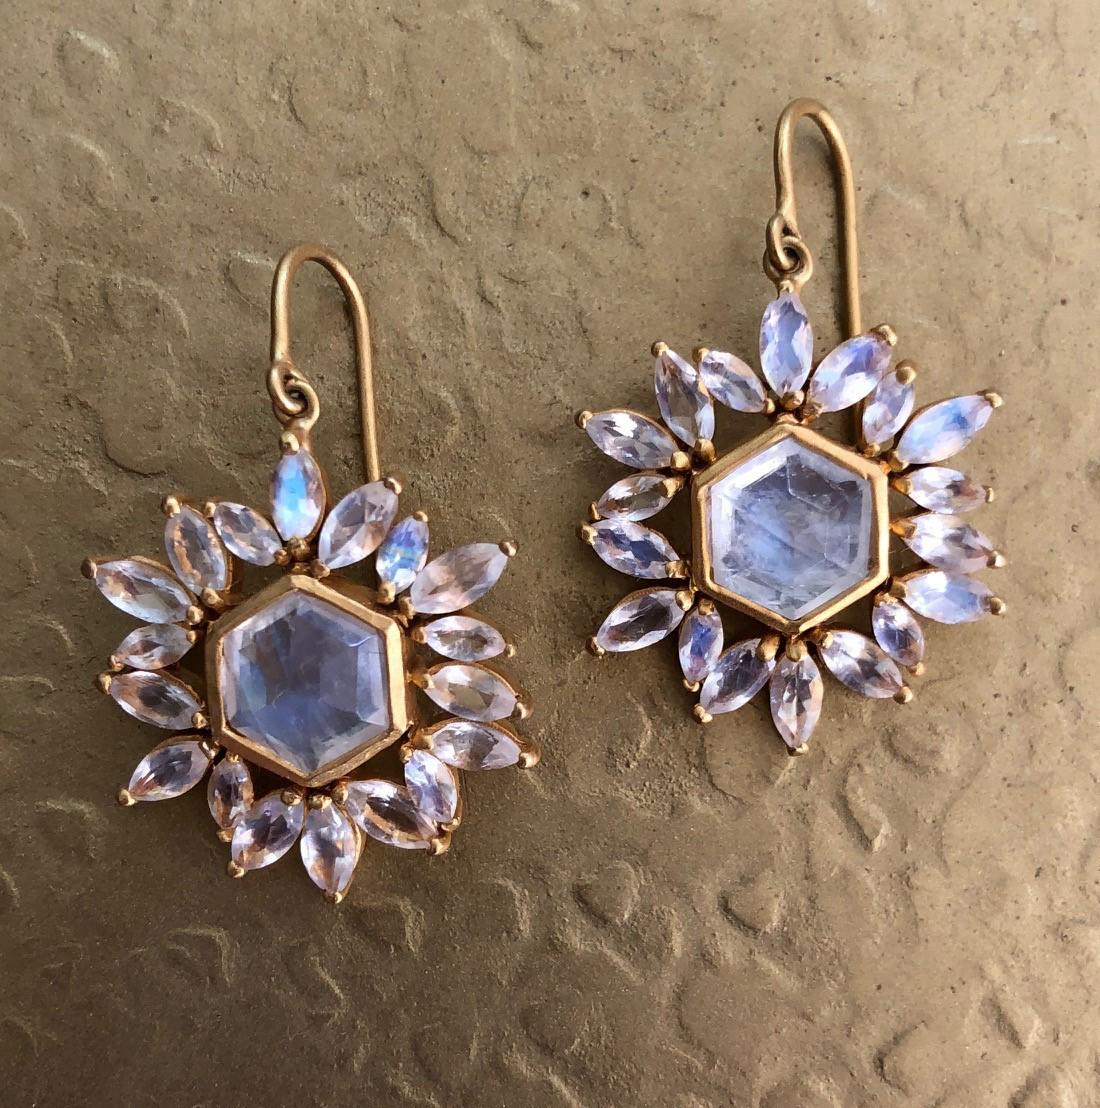 These 18kt Gold faceted Rainbow Moonstones are luminescent and lively, picking up the light and colors around them.  Sophisticated and refined, these earrings are finished in Lauren Harper's signature 18kt Matte Gold, they are perfect for day or